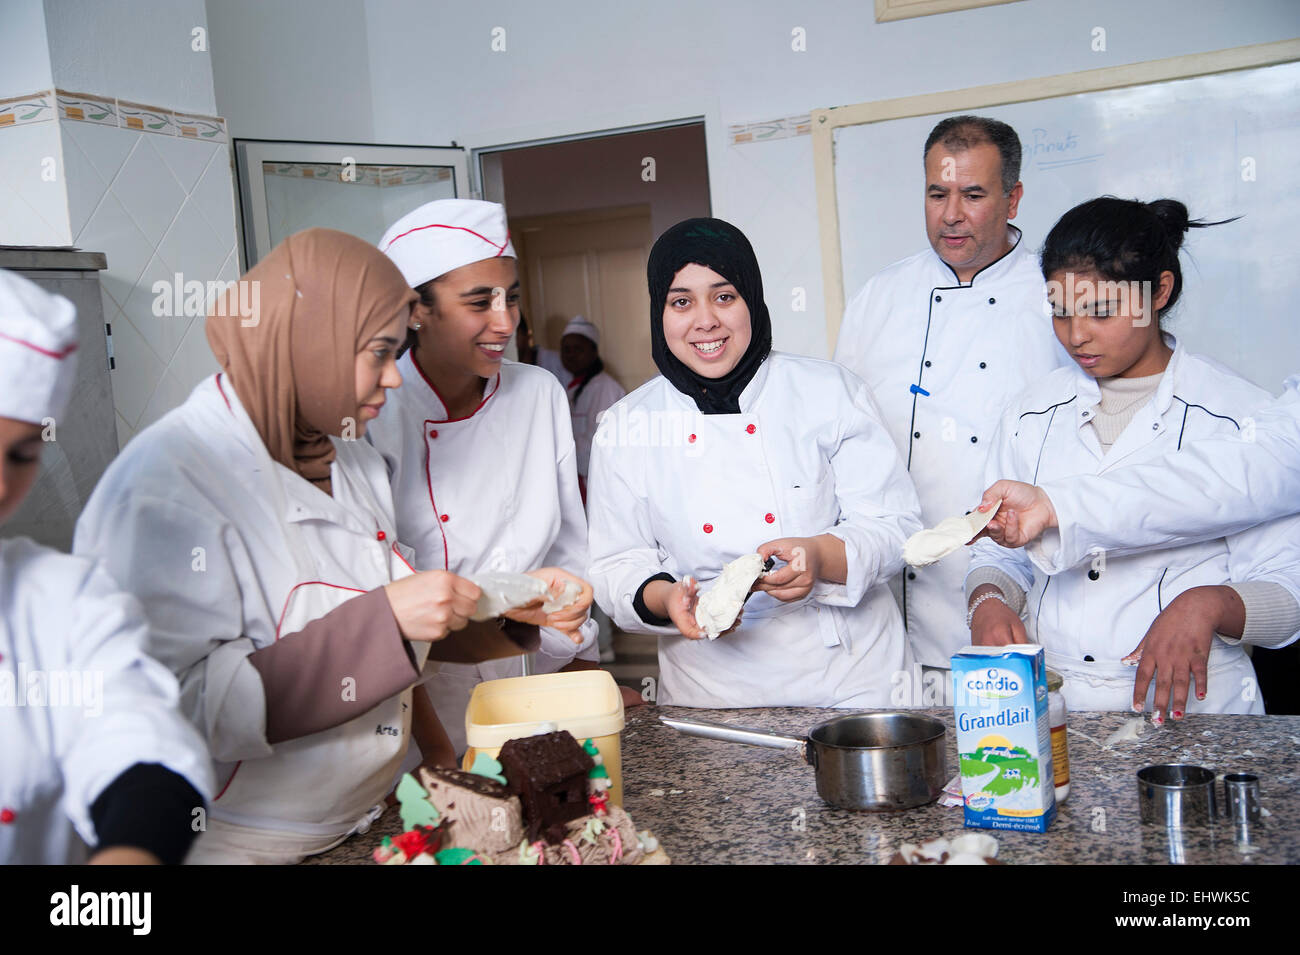 TUNISIA, TUNIS: Students at at Tunis' Tourism School learn cooking, baking, waitering and also have classroom lessons. Stock Photo